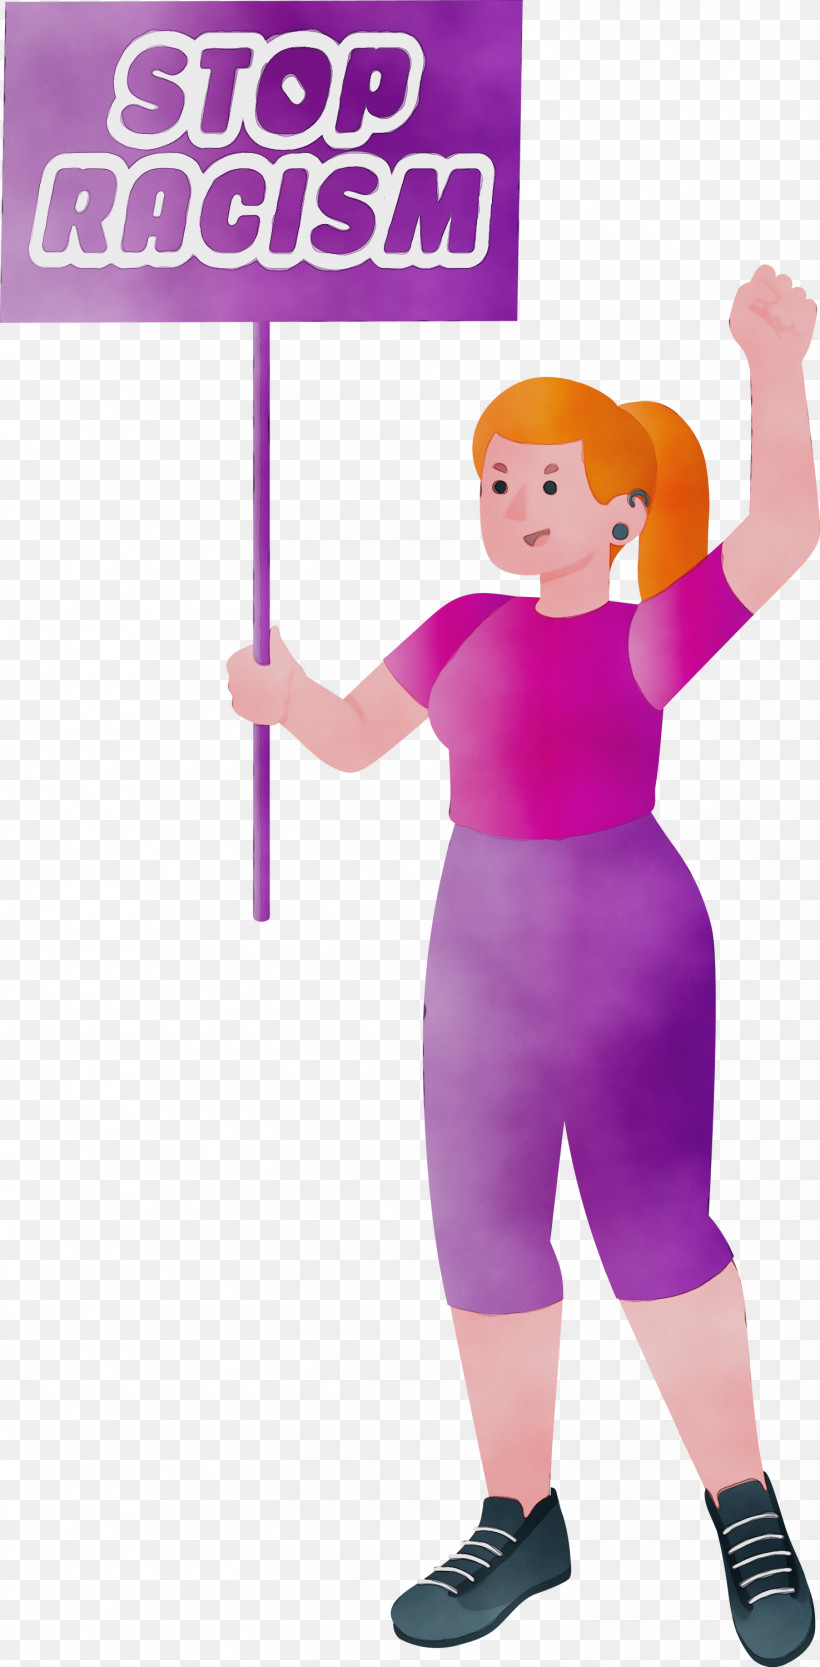 Costume Pink M Meter, PNG, 1475x2999px, Stop Racism, Costume, Meter, Paint, Pink M Download Free